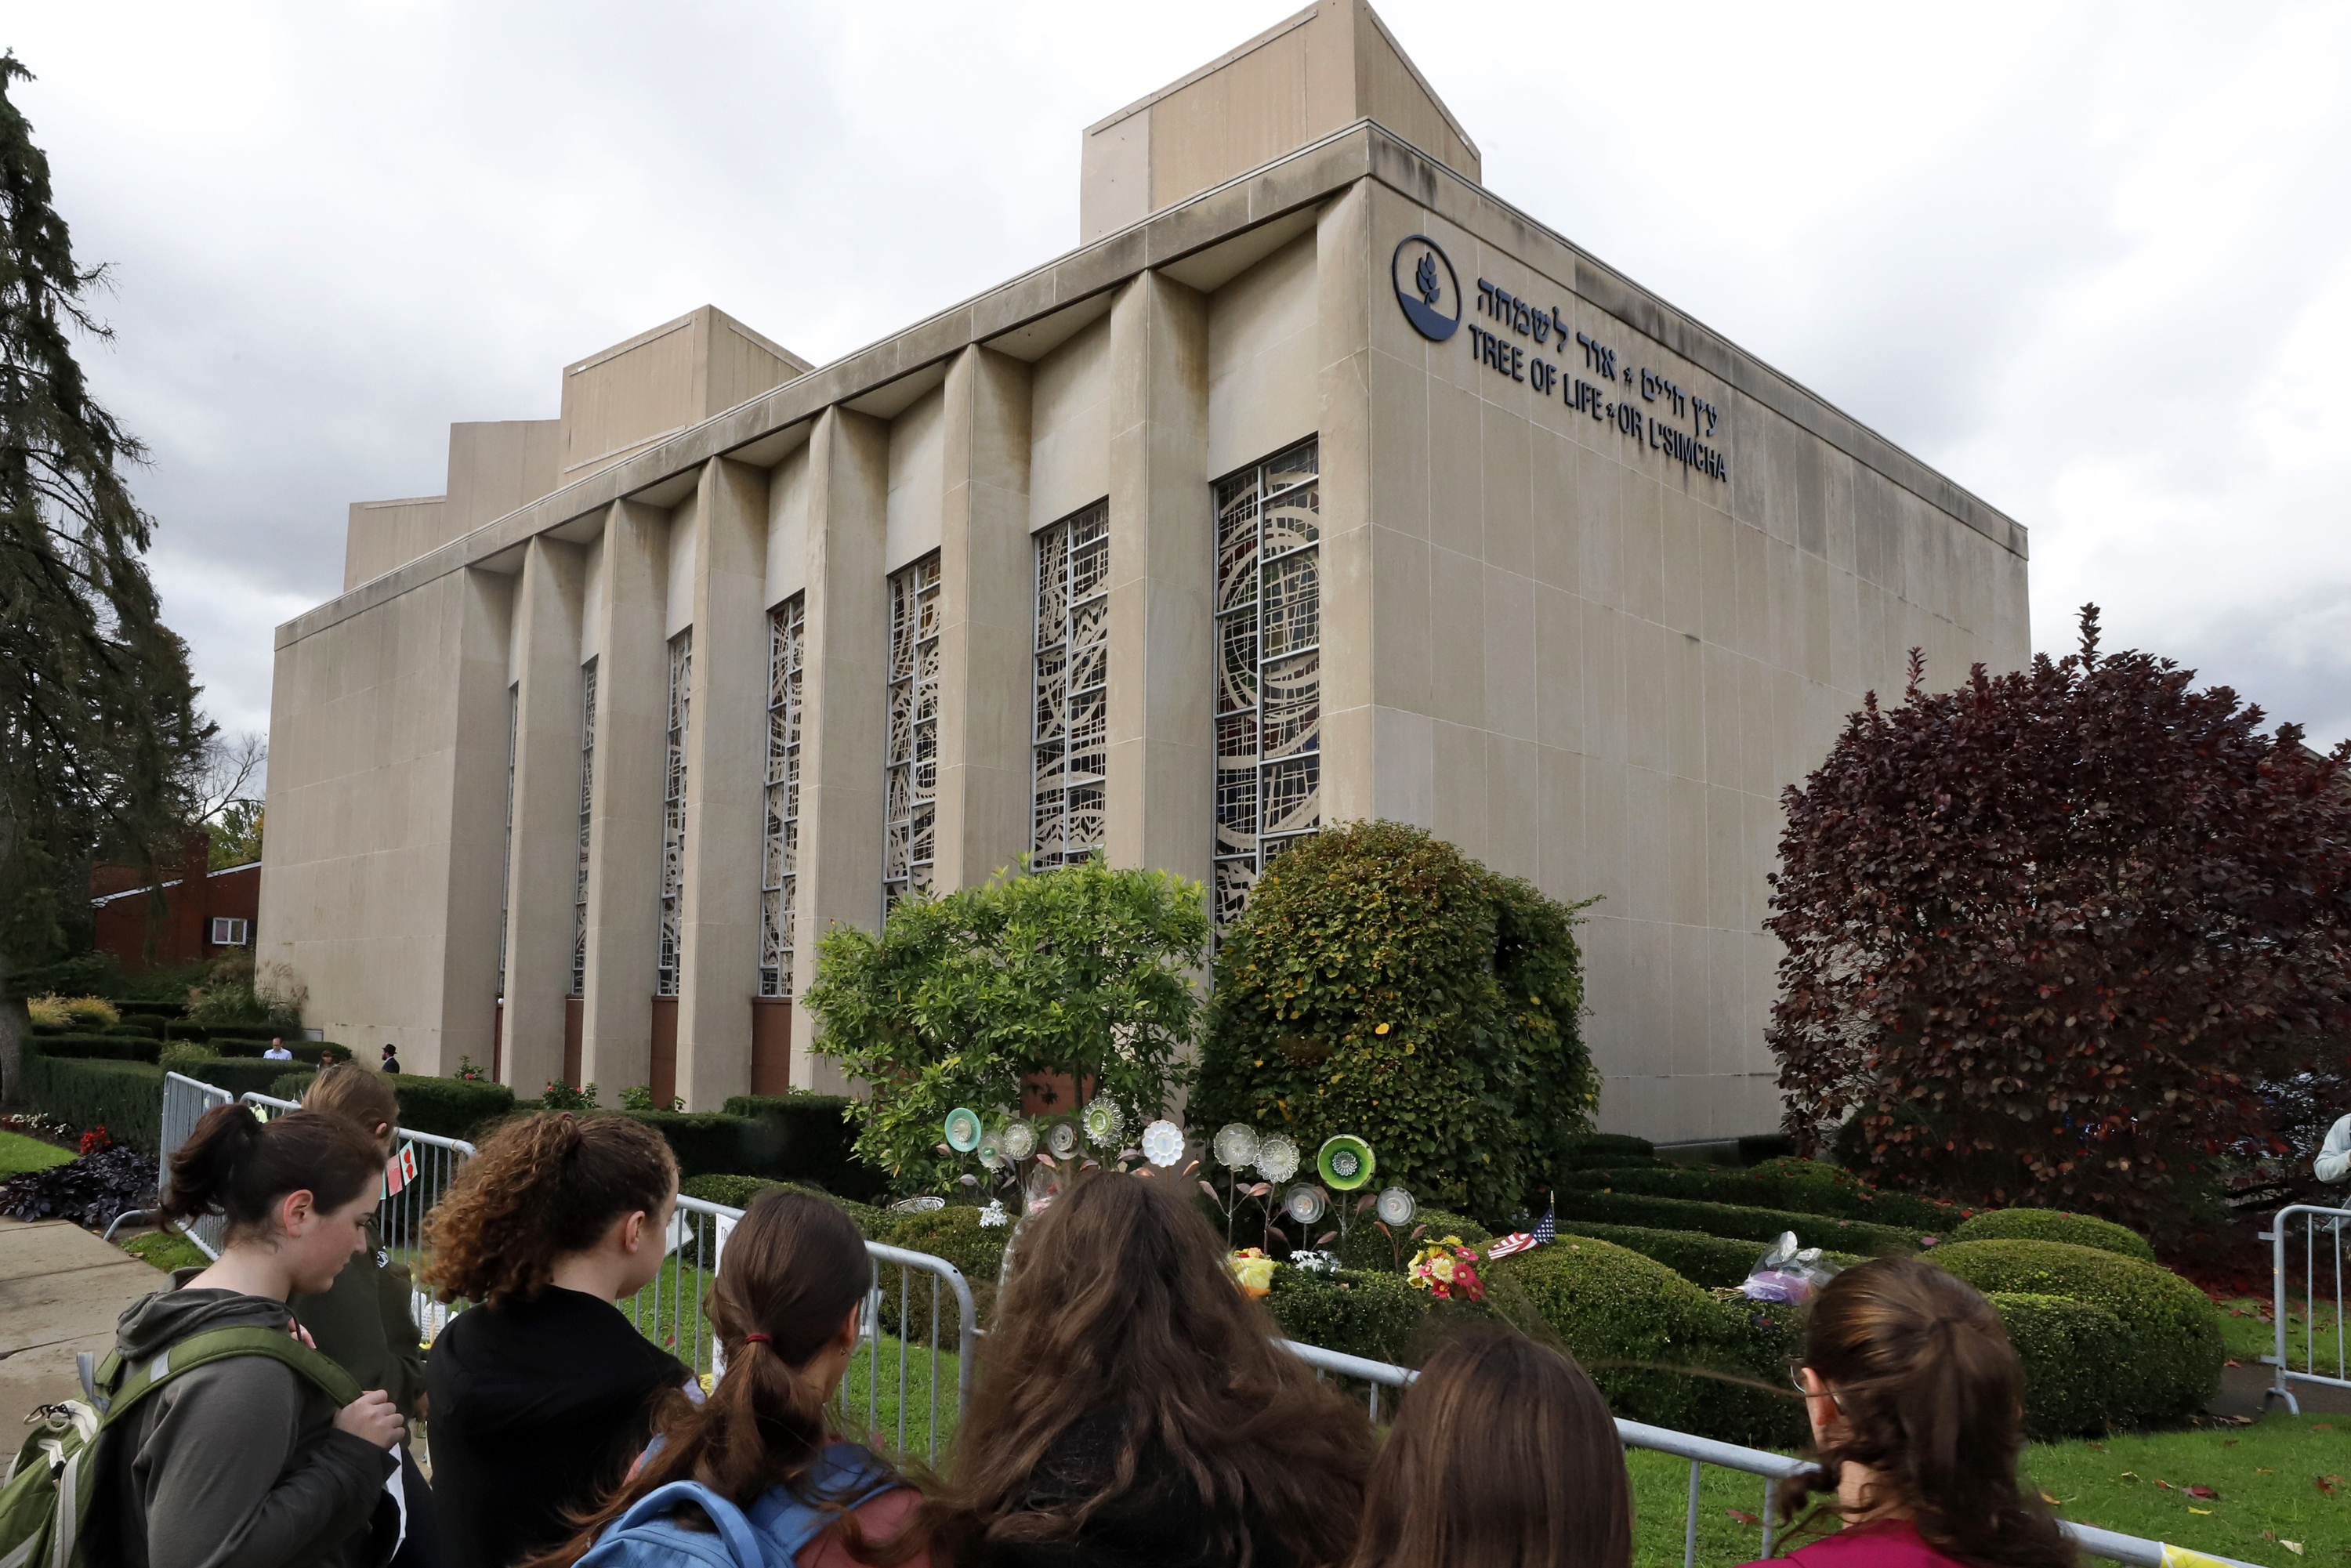 A group of students from a Pittsburgh Yeshiva school gather outside the Tree of Life synagogue in Pittsburgh on Sunday, Oct. 27, 2019, the first anniversary of the shooting at the synagogue, that killed 11 worshippers. (Gene J. Puskar—AP)